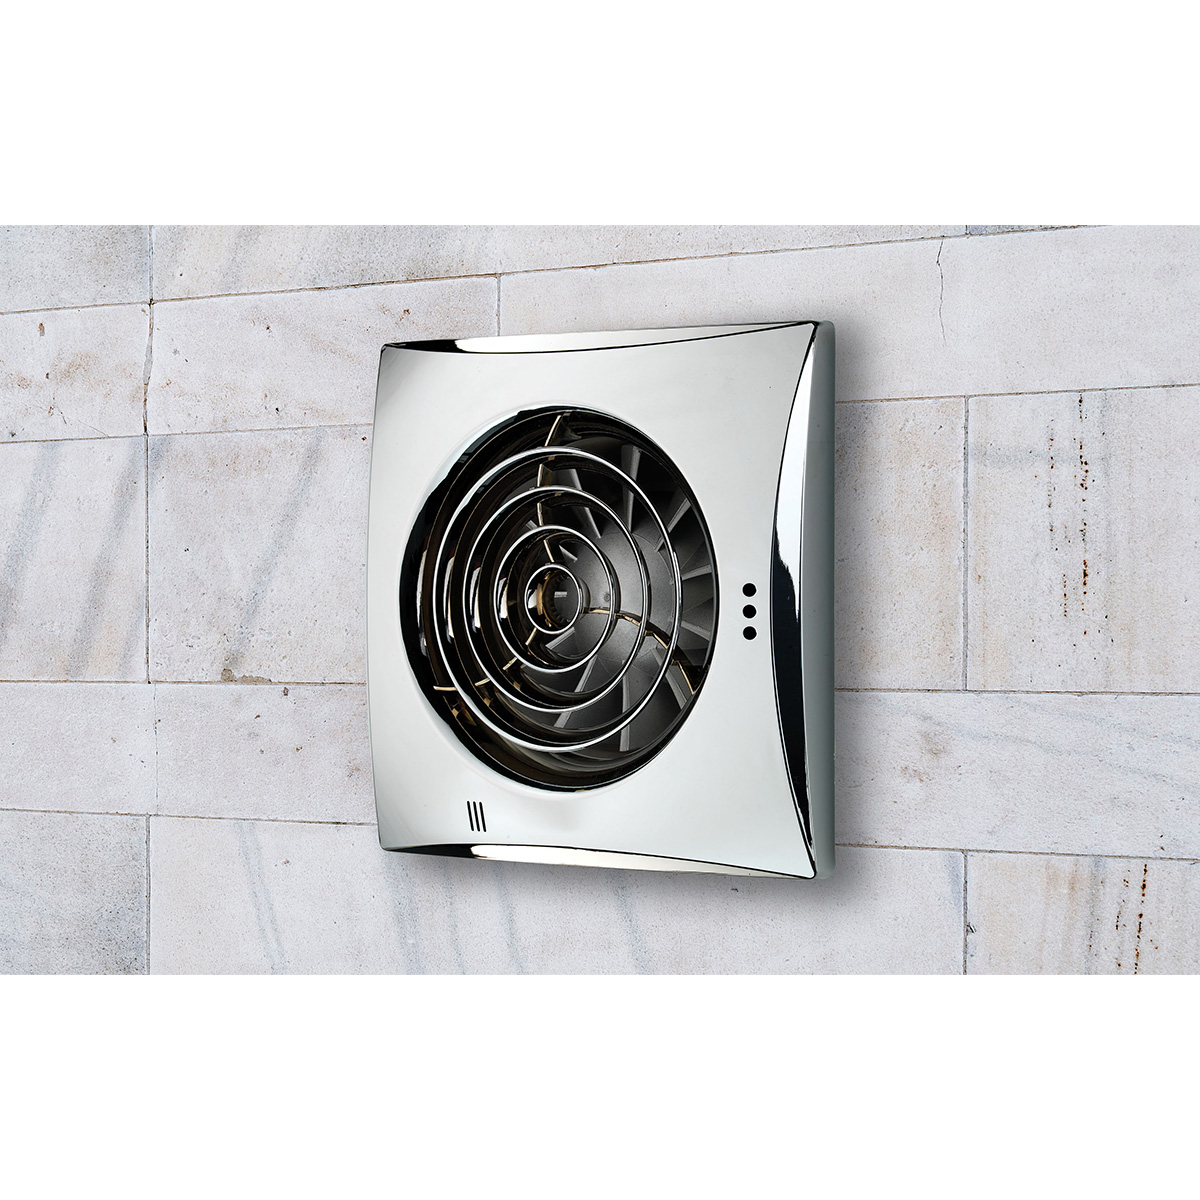 Flow Wall Mounted Fan with Timer - Chrome